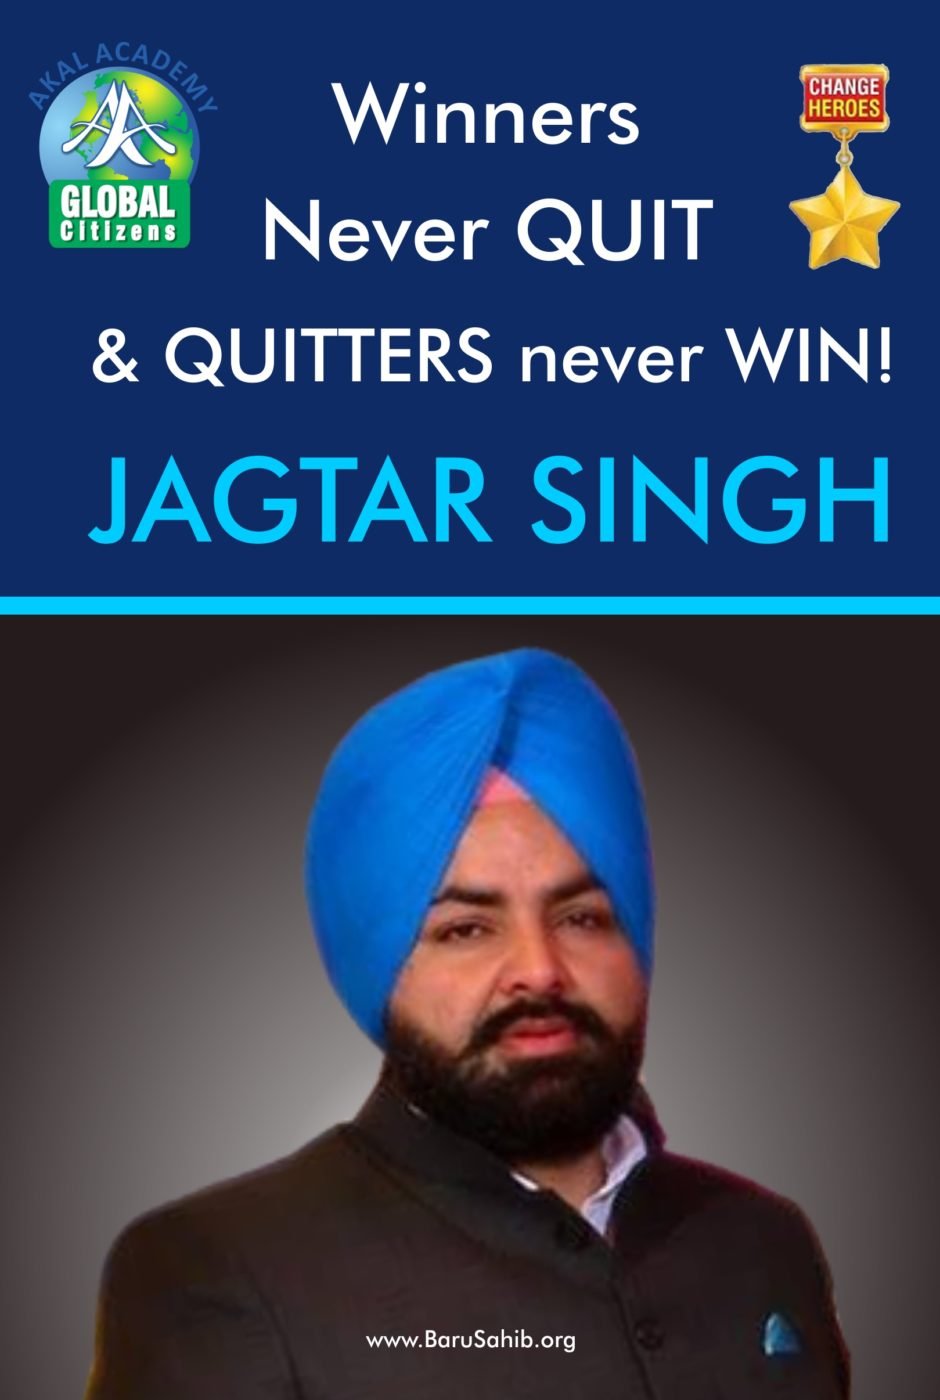 Winners Never QUIT & QUITTERS never WIN! – Jagtar Singh